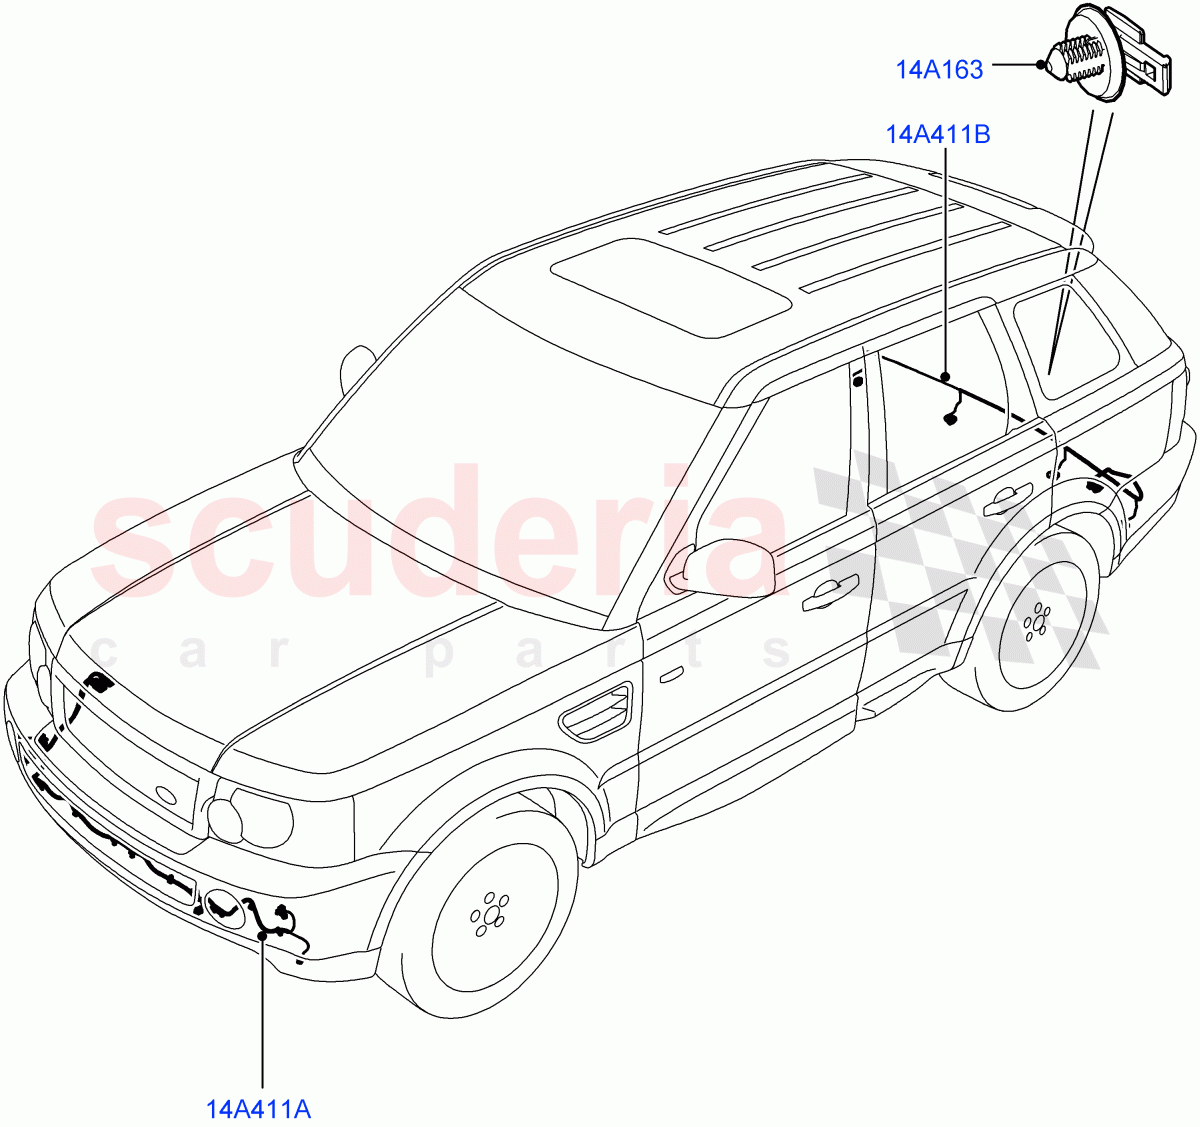 Electrical Wiring - Body And Rear(Bumper)((V)TO9A999999) of Land Rover Land Rover Range Rover Sport (2005-2009) [4.4 AJ Petrol V8]